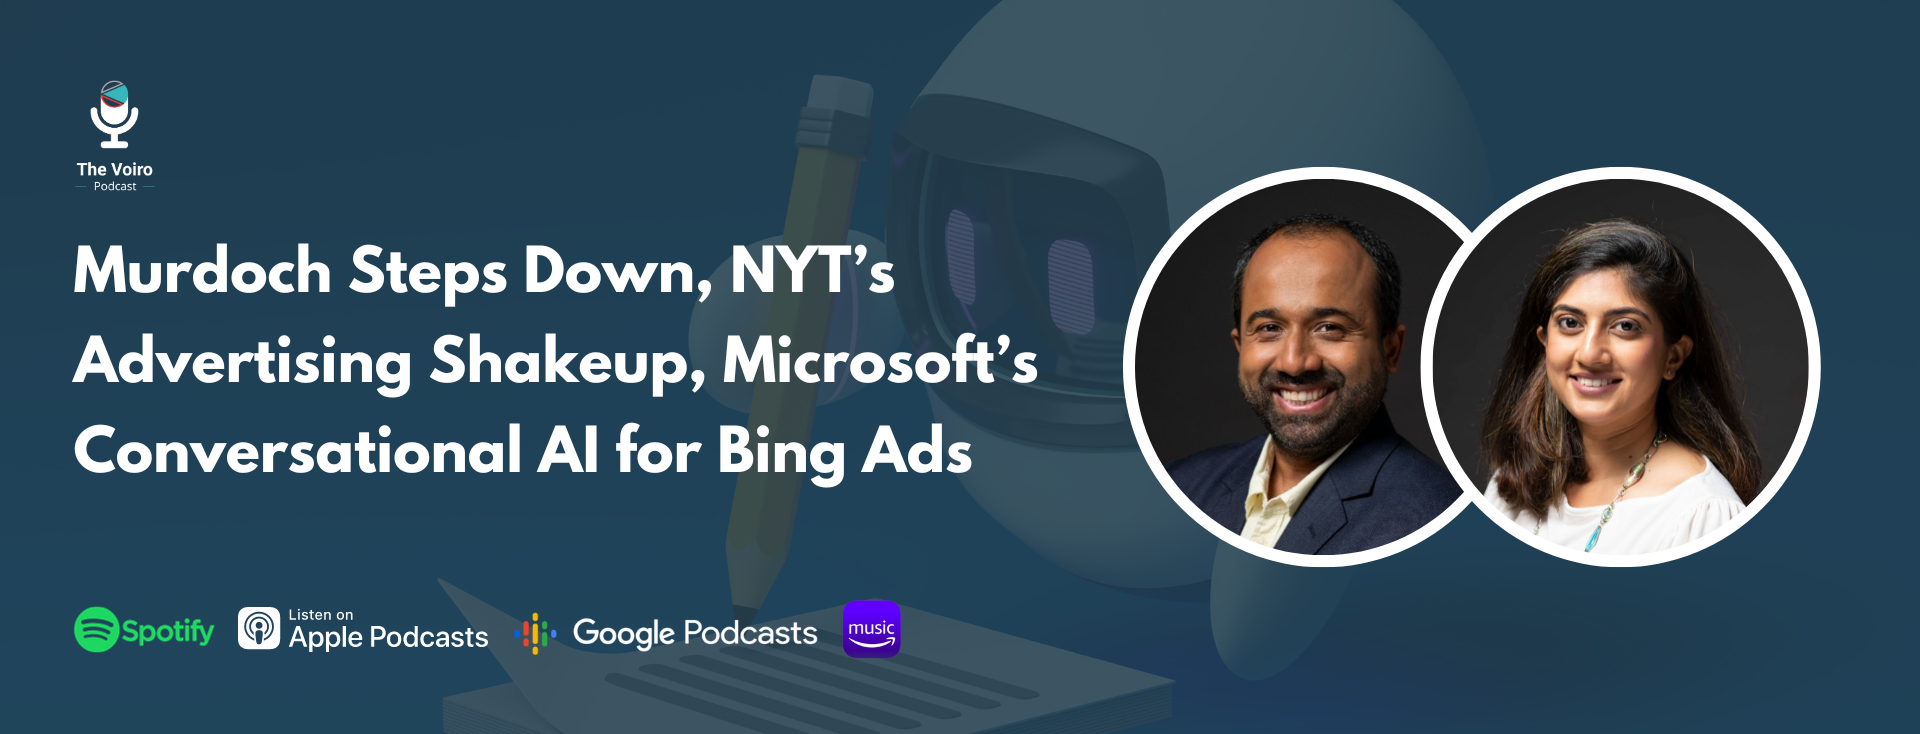 Murdoch Steps Down, NYT’s Advertising Shakeup, Microsoft’s Conversational AI for Bing Ads